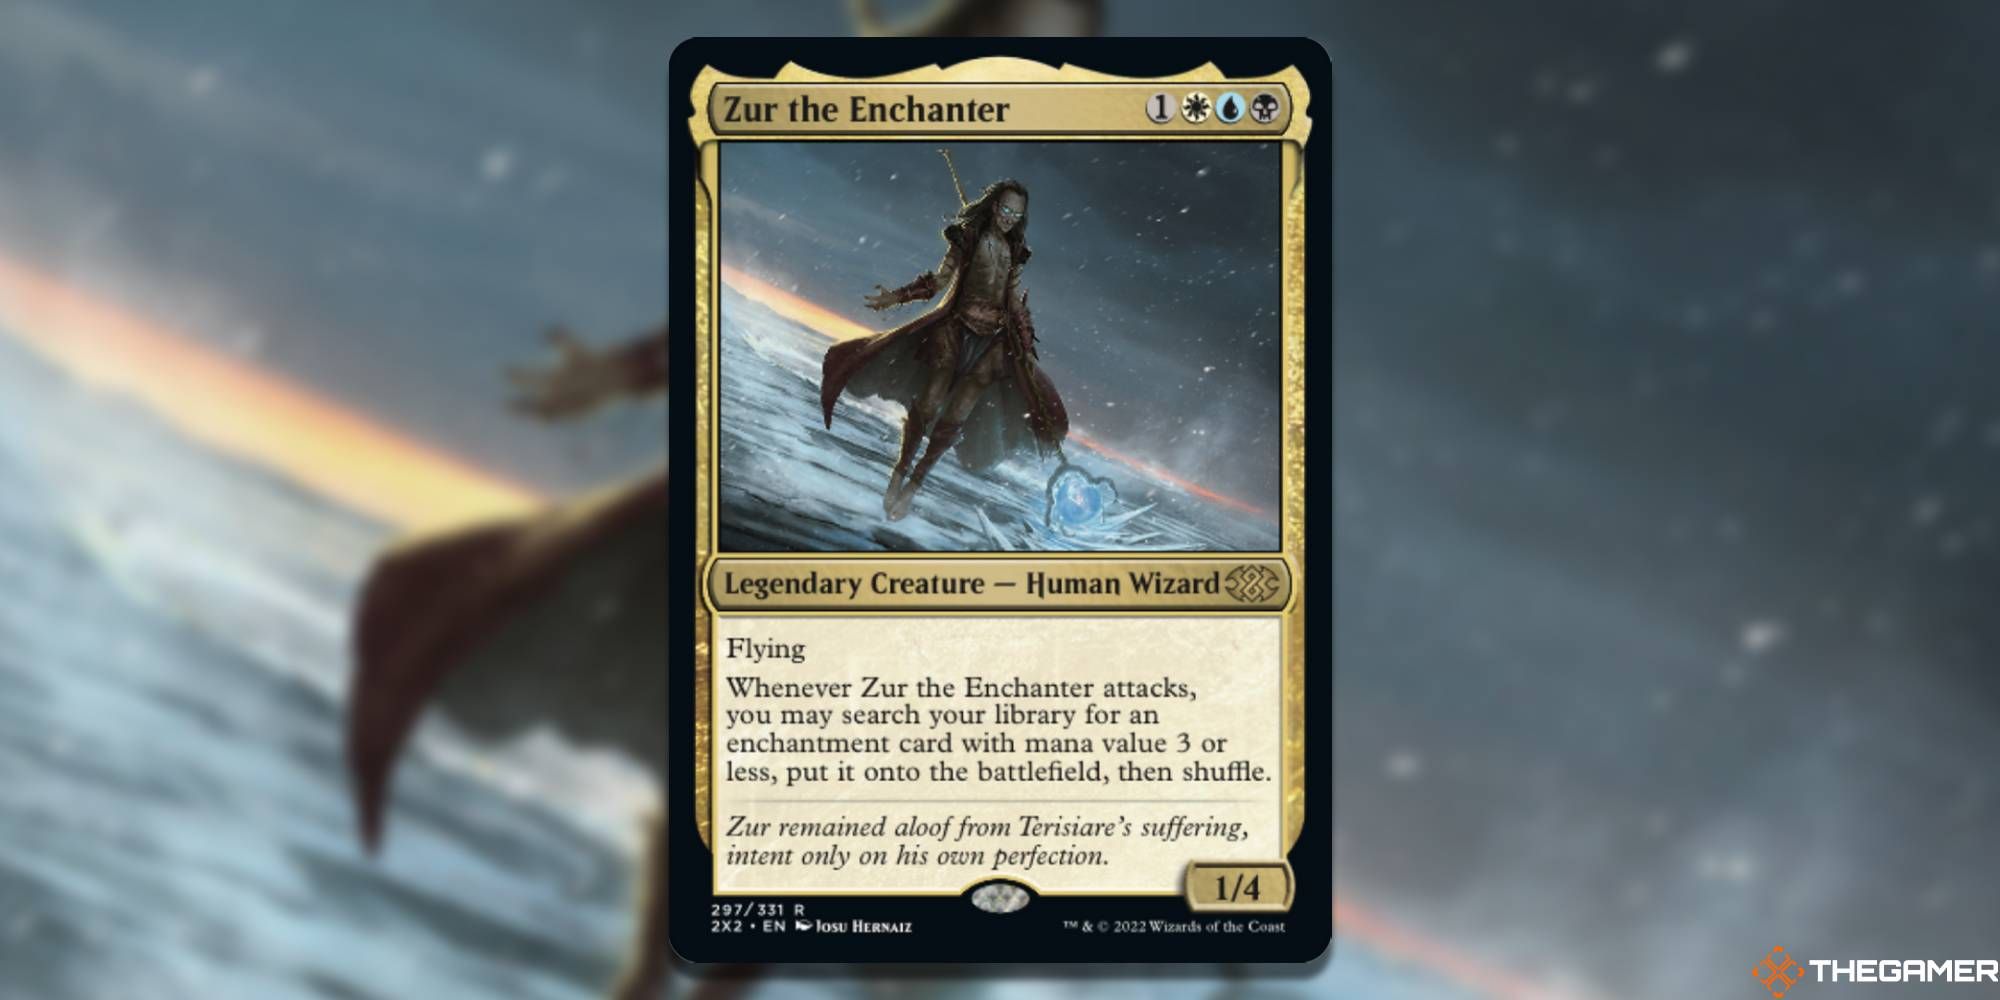 Image of the Zur the Enchanter card in Magic: The Gathering, with art by Josu Hernaiz 